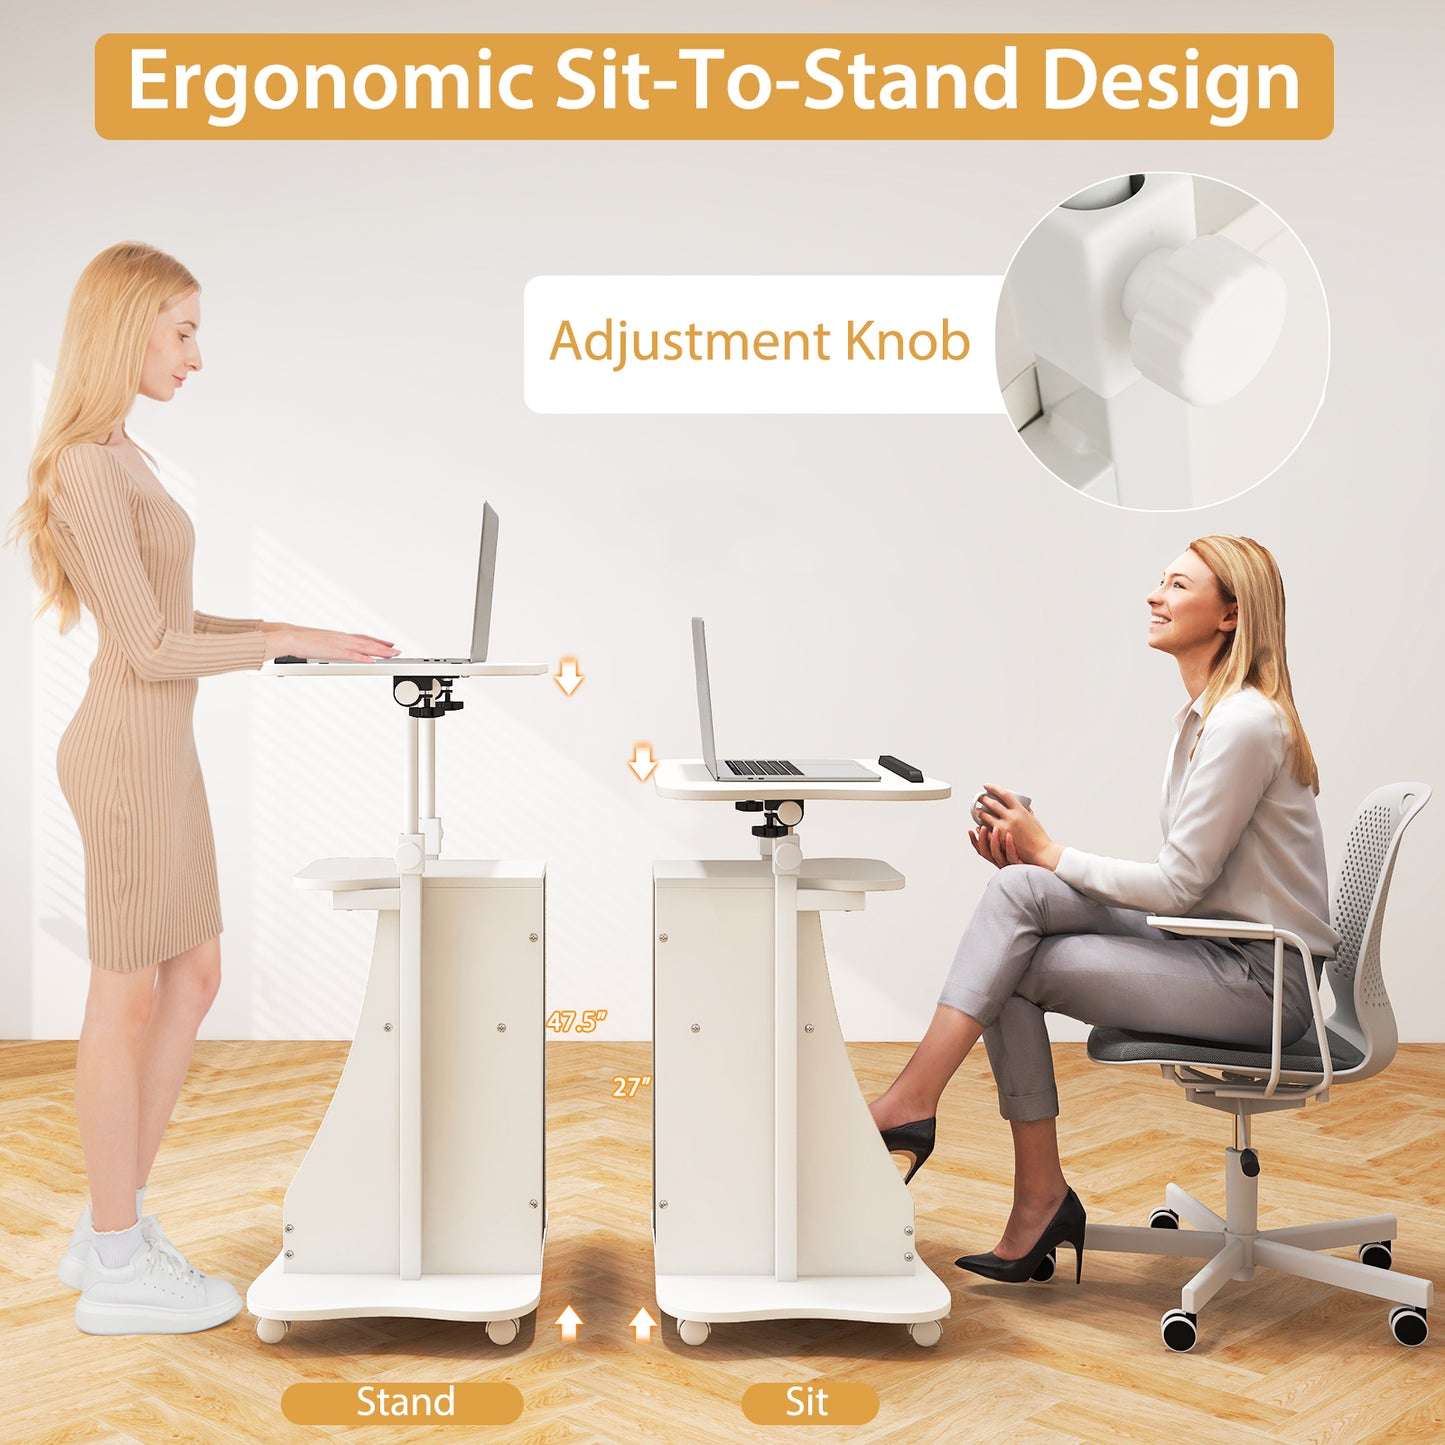 Mobile Podium Stand Height Adjustable Laptop Cart with Tilting Tabletop and Storage Compartments-White